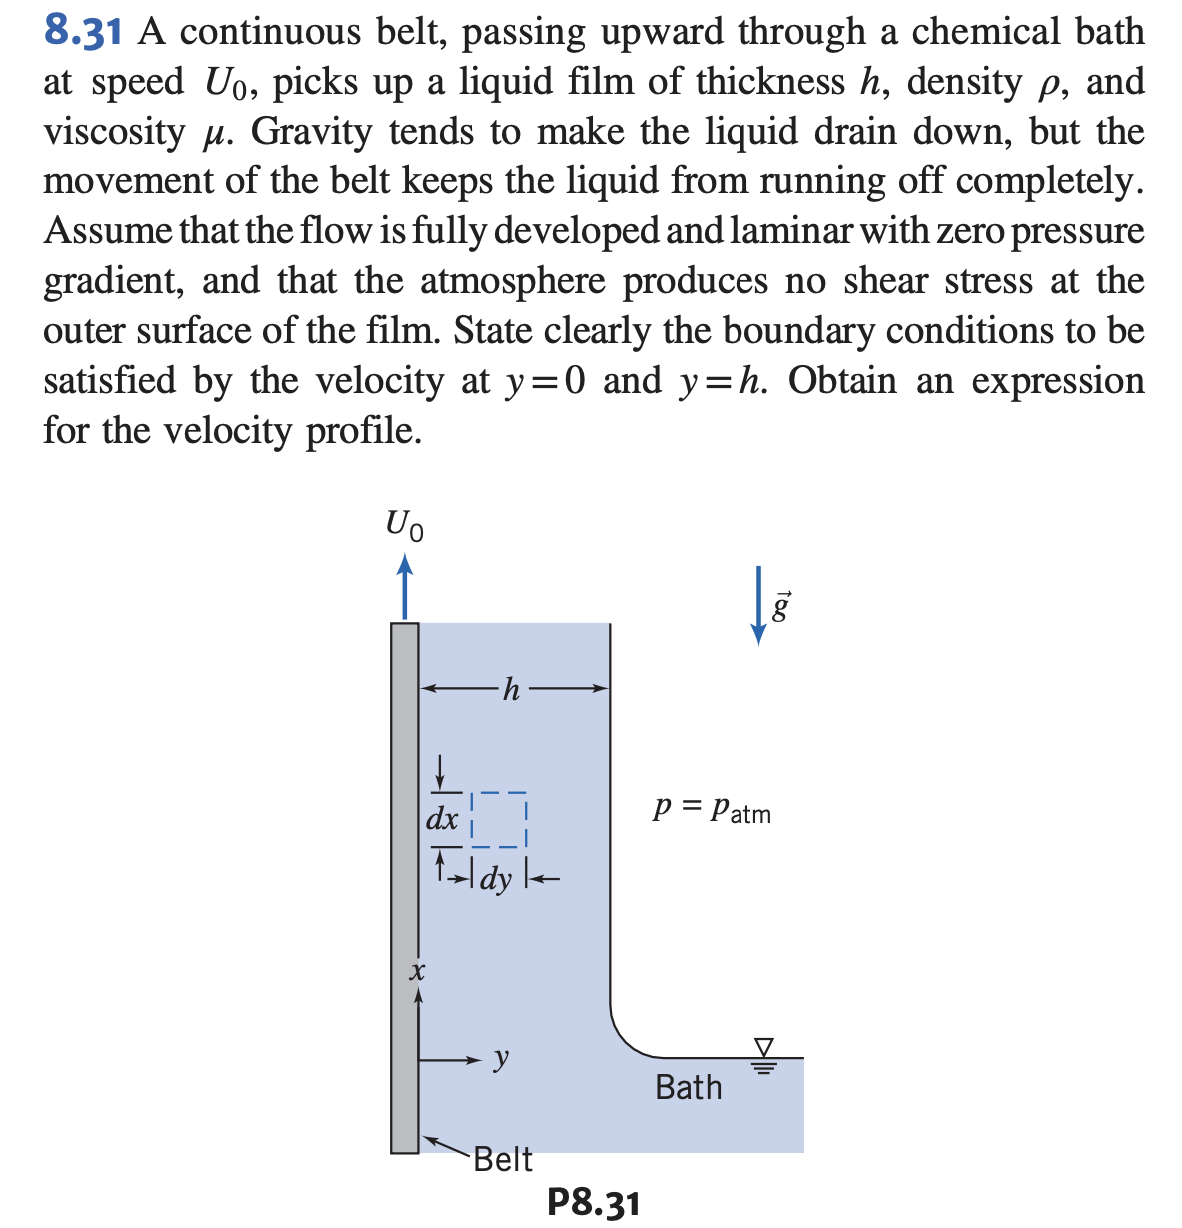 8.31 A continuous belt, passing upward through a chemical bath
at speed Uo, picks up a liquid film of thickness h, density p, and
viscosity u. Gravity tends to make the liquid drain down, but the
movement of the belt keeps the liquid from running off completely.
Assume that the flow is fully developed and laminar with zero pressure
gradient, and that the atmosphere produces no shear stress at the
outer surface of the film. State clearly the boundary conditions to be
satisfied by the velocity at y=0 and y=h. Obtain an expression
for the velocity profile.
Uo
y.
|dx
p = Patm
Toldy le
→ y
Bath
Belt
P8.31
